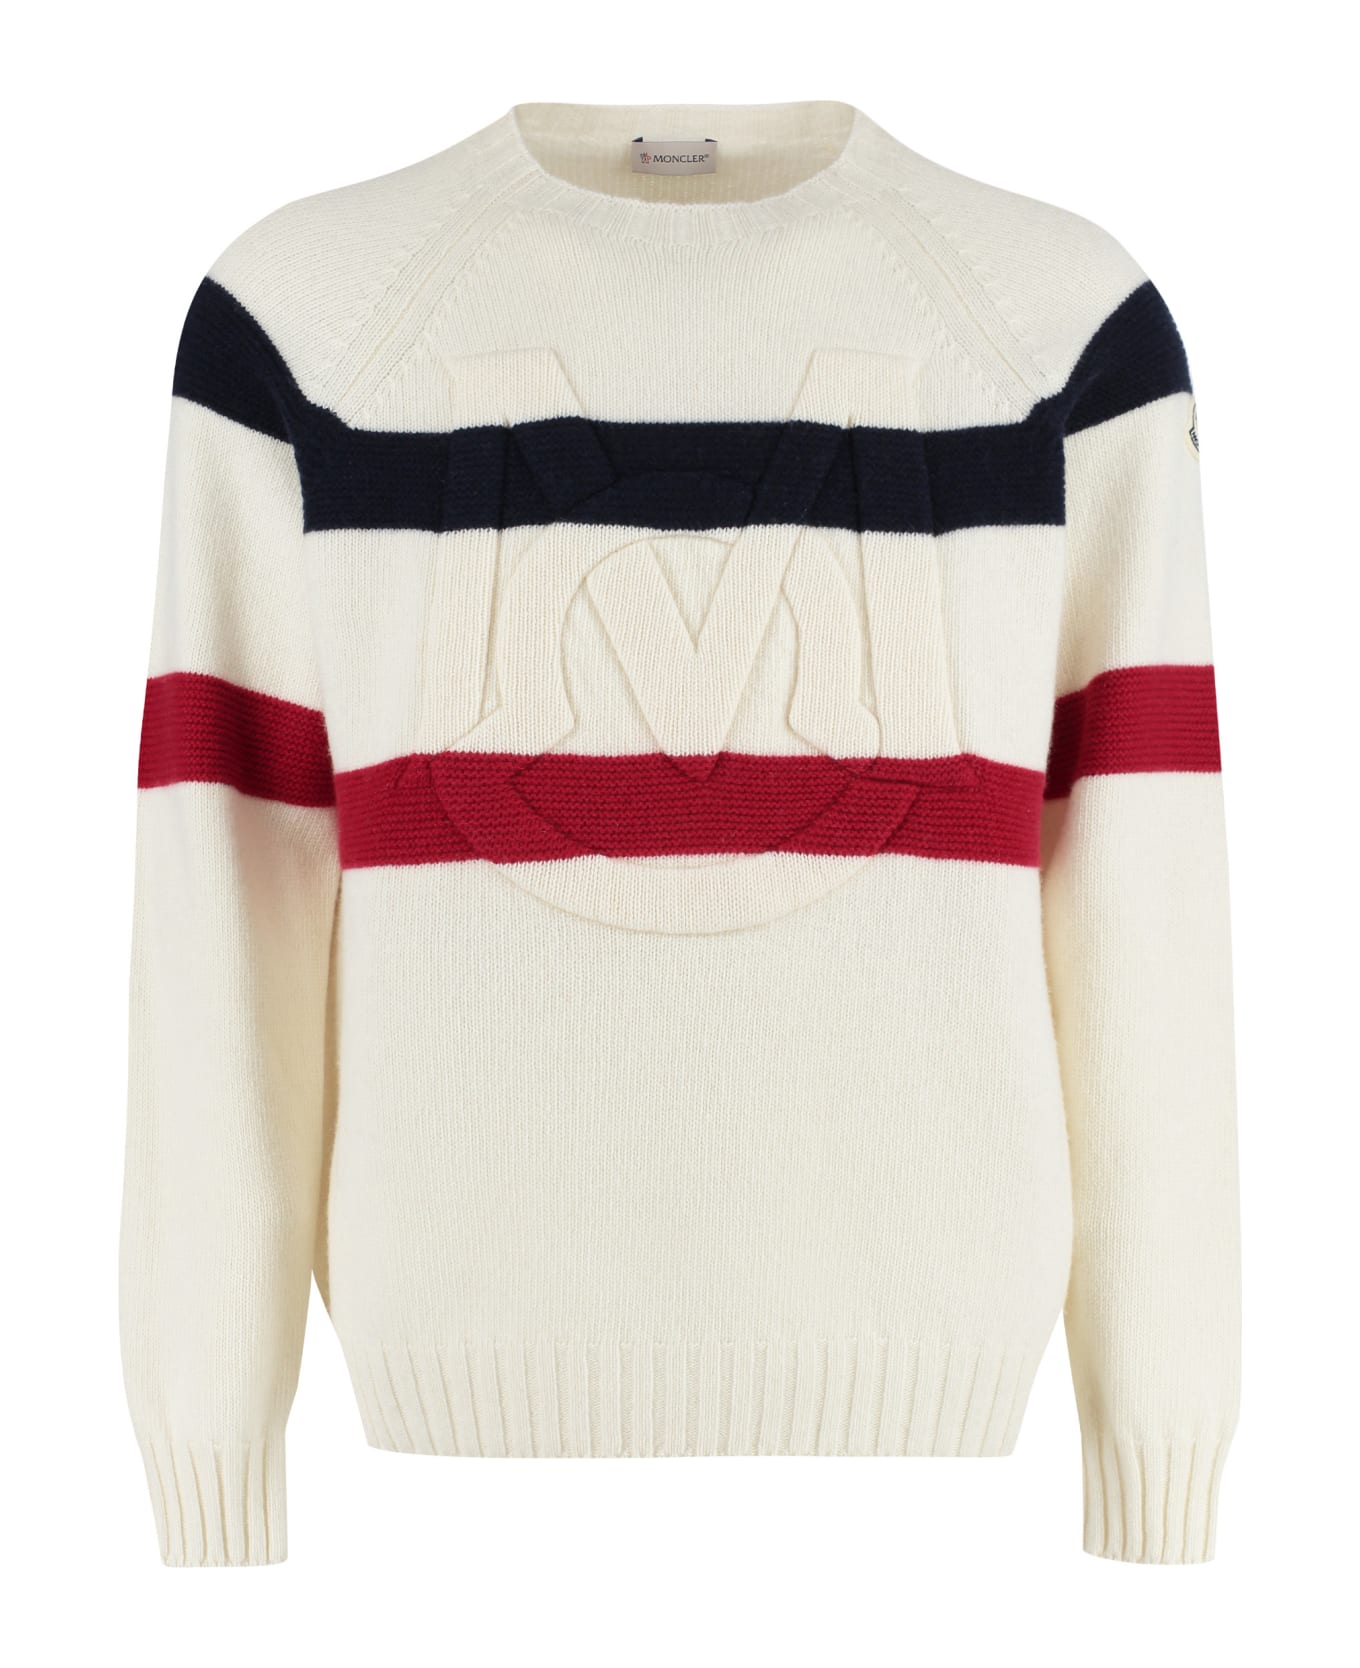 Moncler Genius Wool And Cashmere Sweater - Multicolor